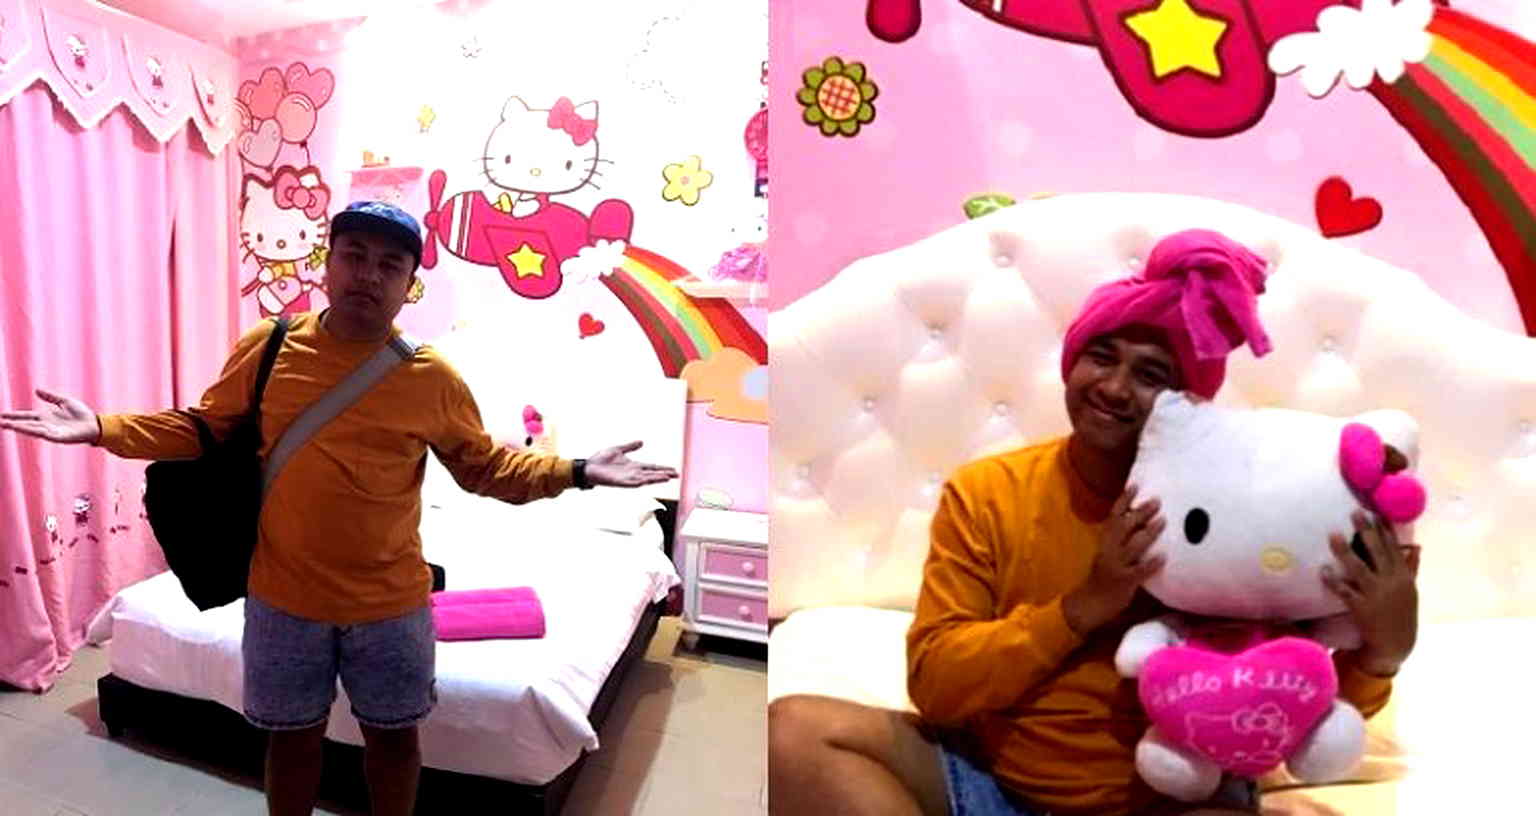 Wife Trolls Husband By Booking Him a Hello Kitty-Themed Hotel Room